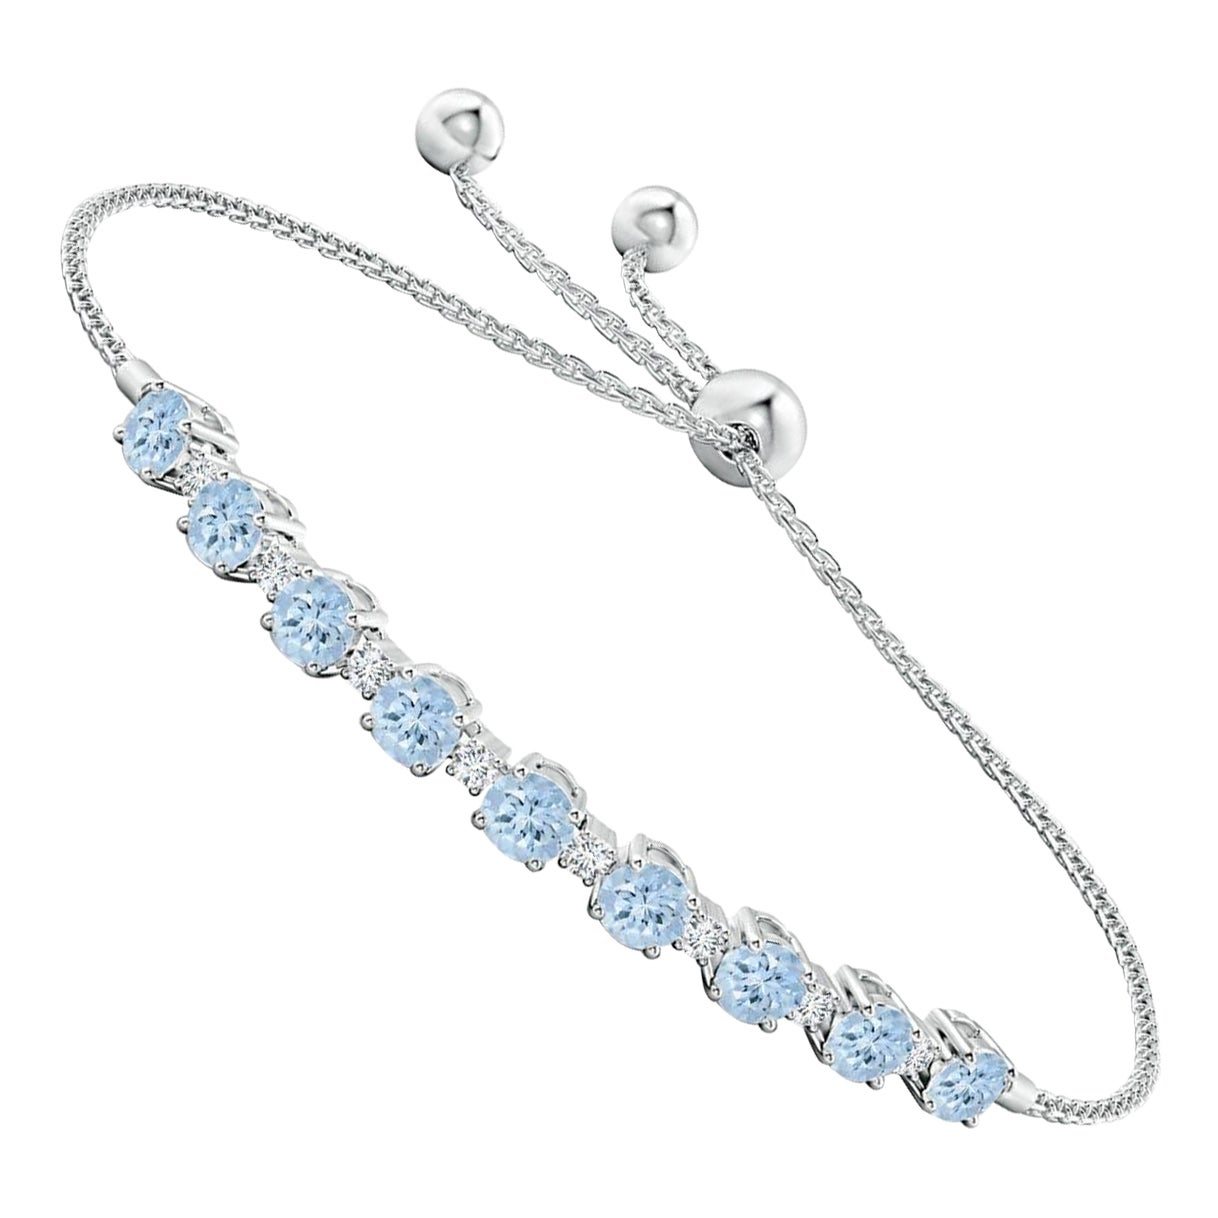 Natural 1.8ct Aquamarine and Diamond Tennis Bracelet in 14K White Gold For Sale